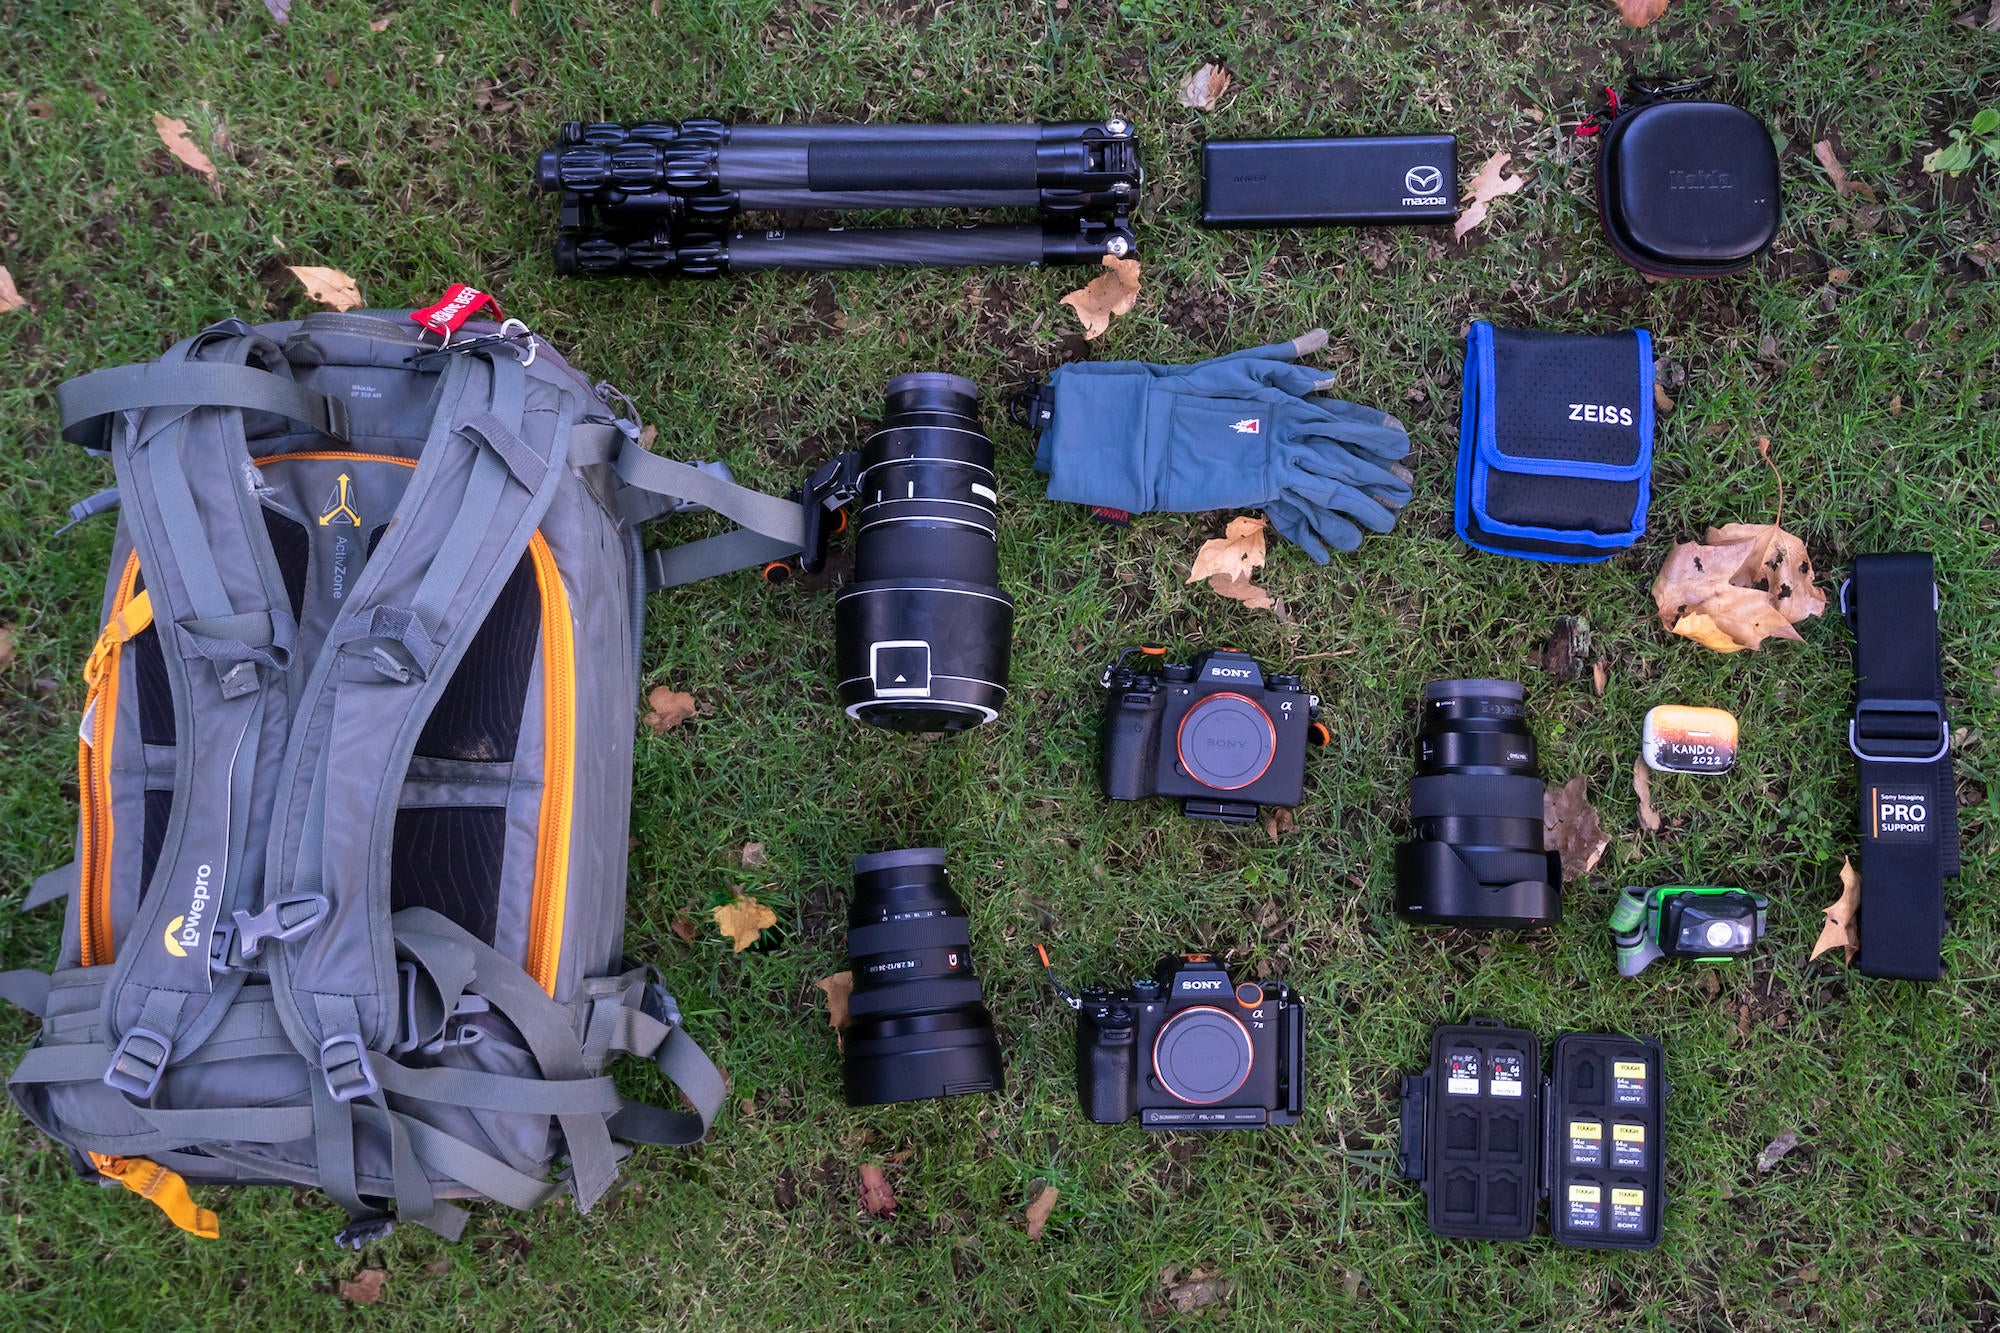 Andrew Eggers' gear for photography and timelapses